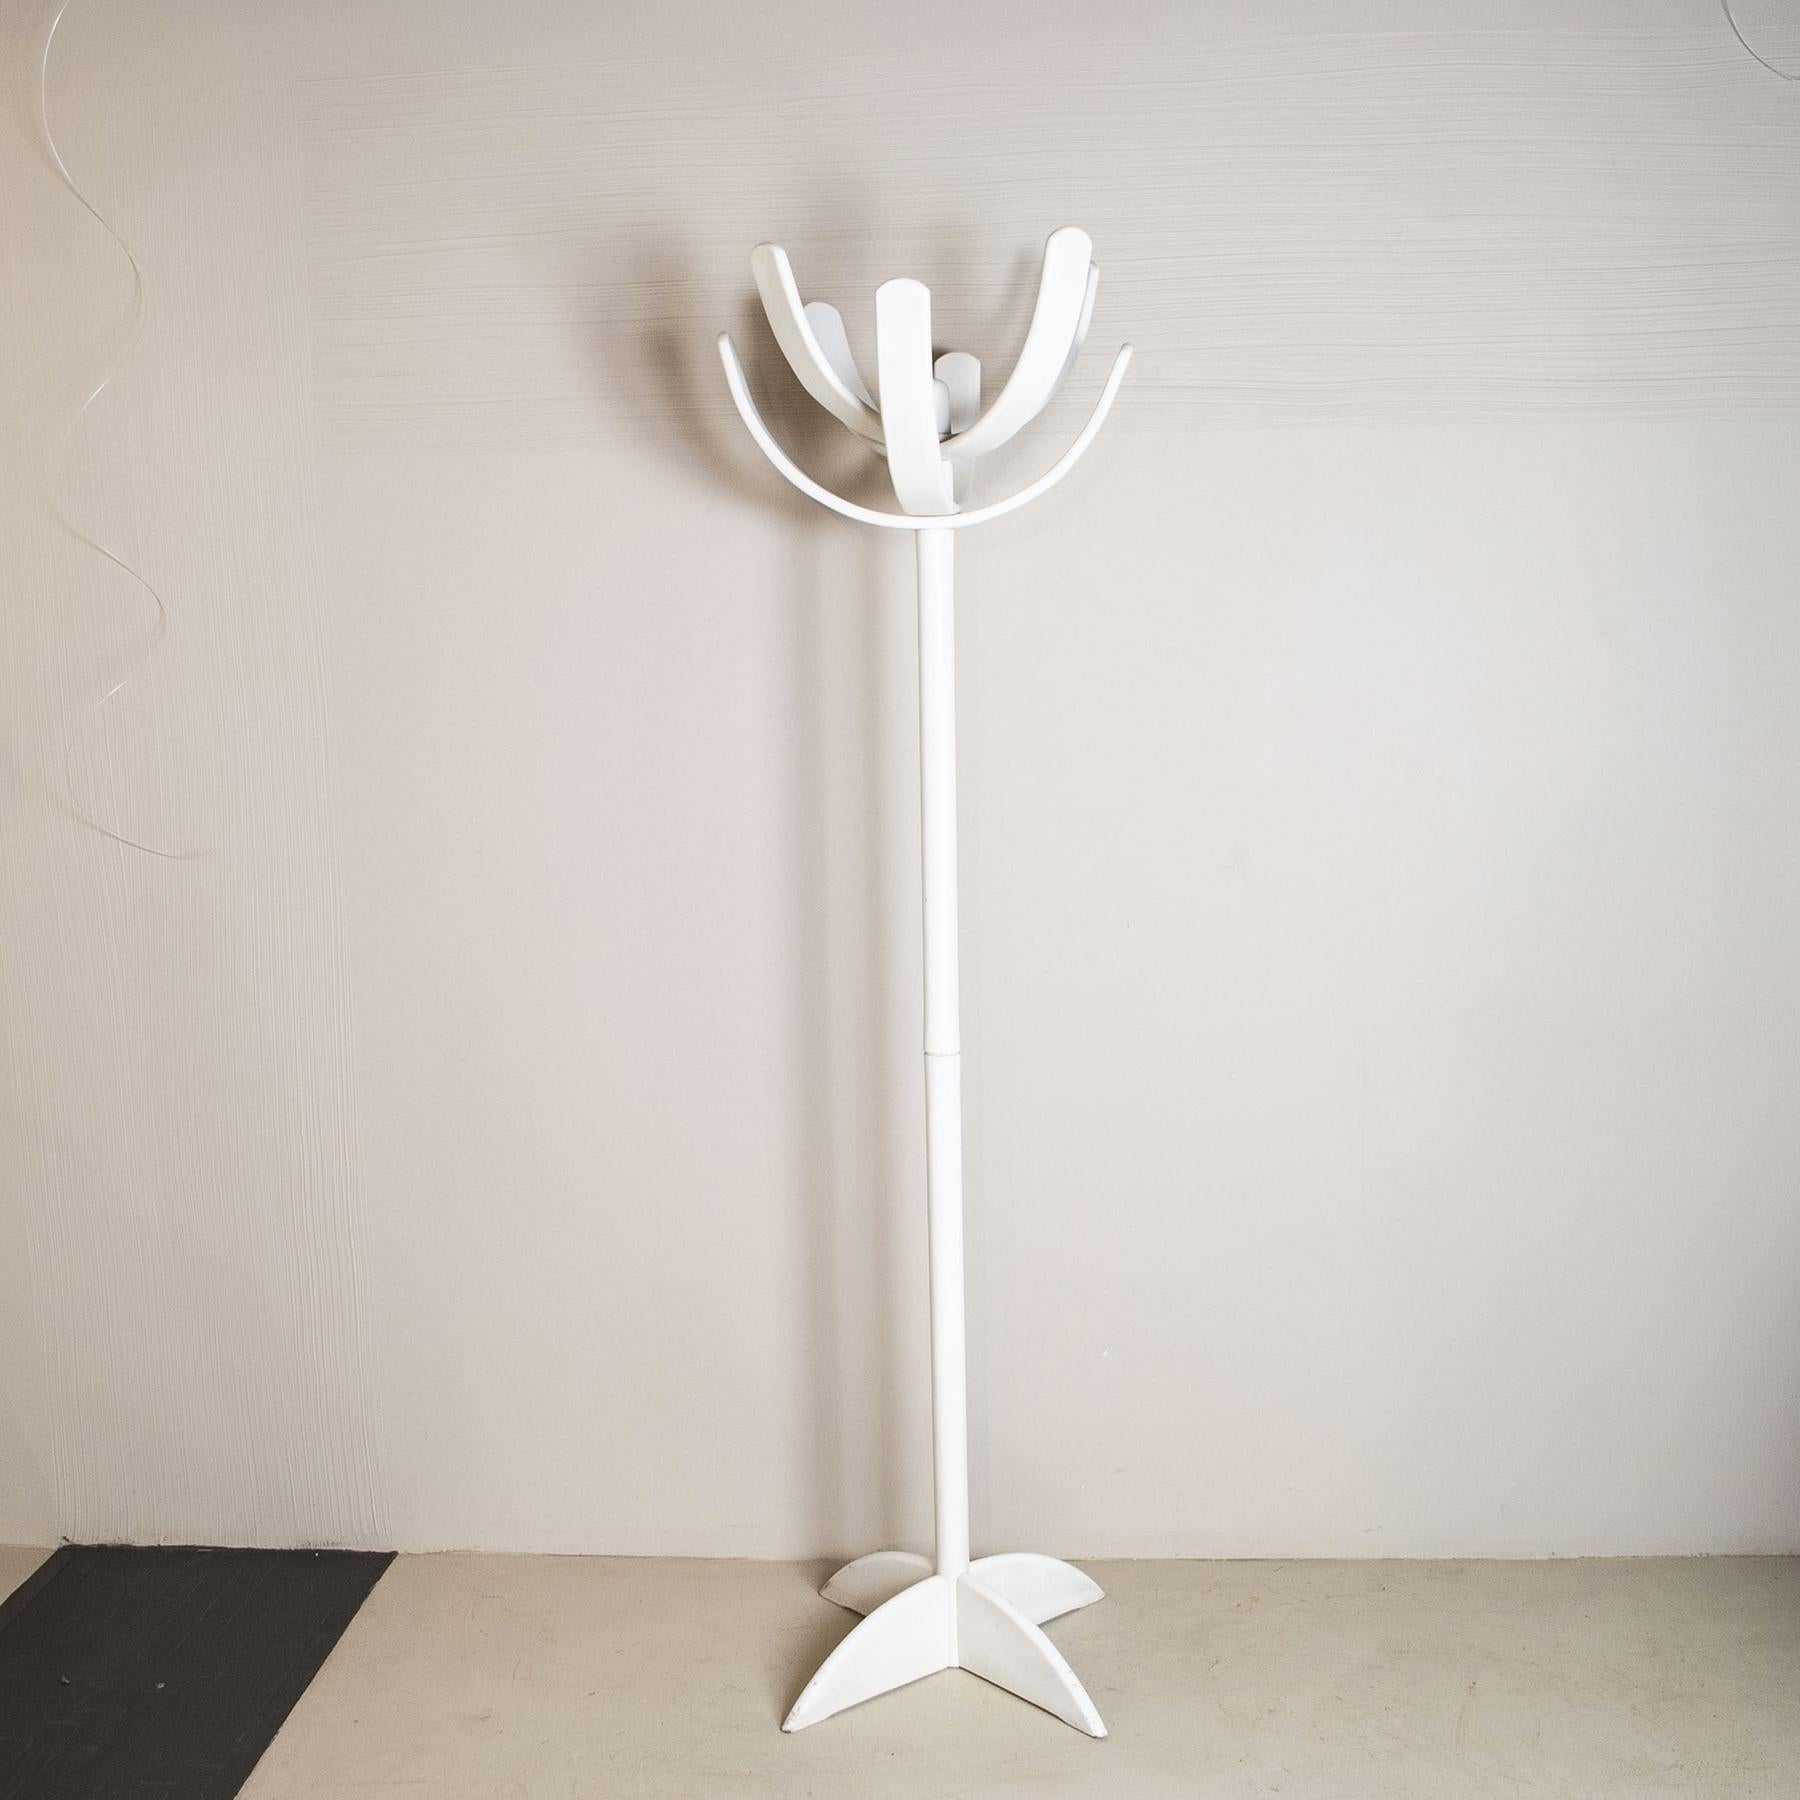 Coat stand white lacquered wood structure Pallavisini coat stand “Cactus”, design Mauro Pasquinelli early 70’s.
Born Aug. 27, 1931, in Scandicci, Florence, Italy, Mauro Pasquinelli attended the workshop of his father - a skilled furniture craftsman